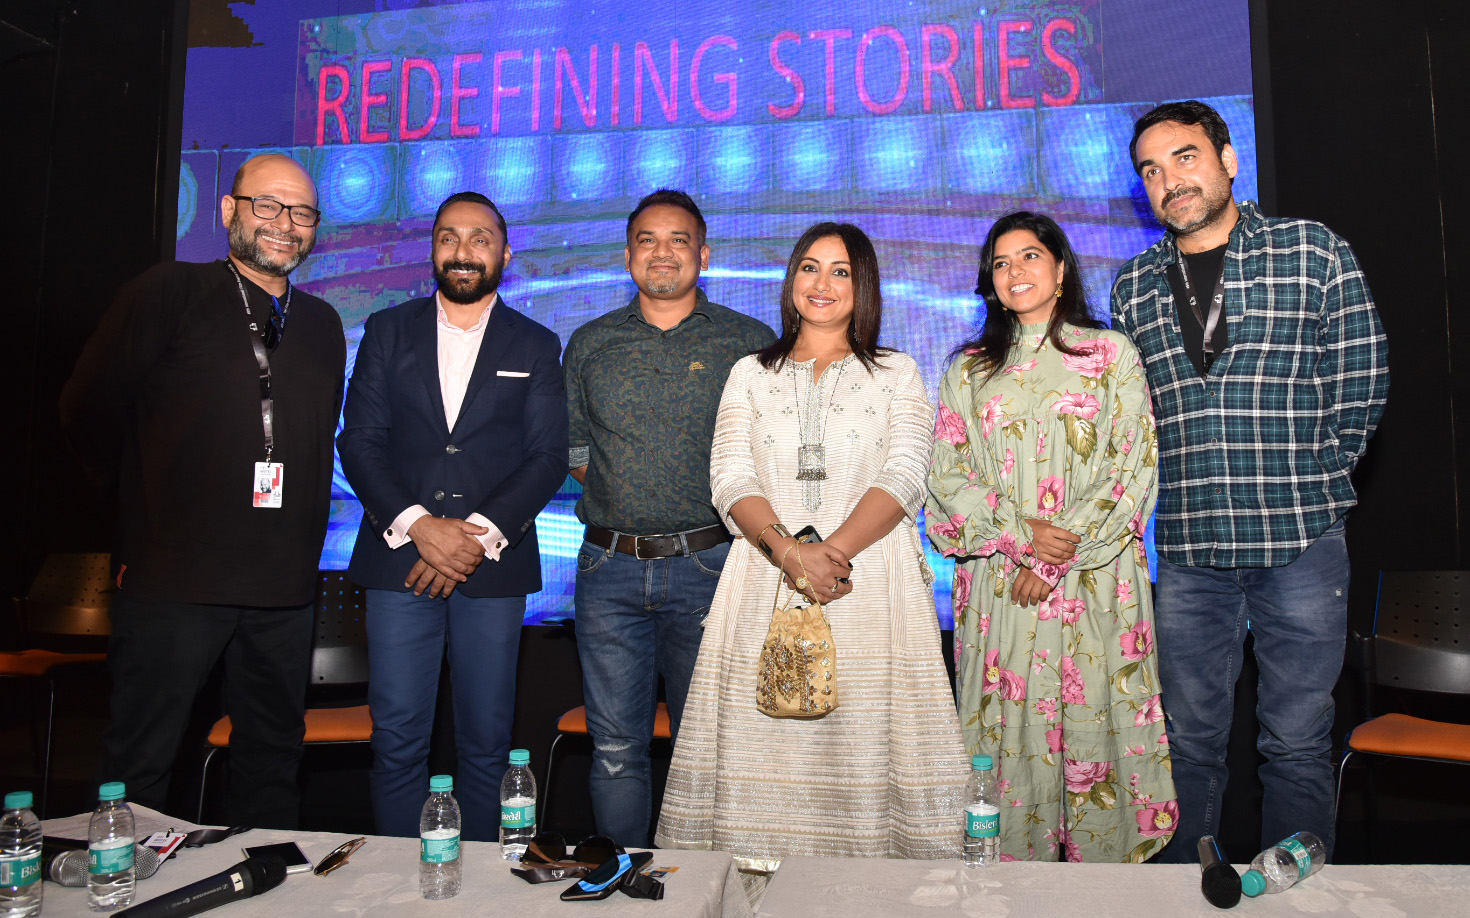  Sh. Rahul Bose, Sh. Pankaj Tripathi , Smt. Divya Dutta with other dignitaries during the in conversation session on ‘redefining stories.’